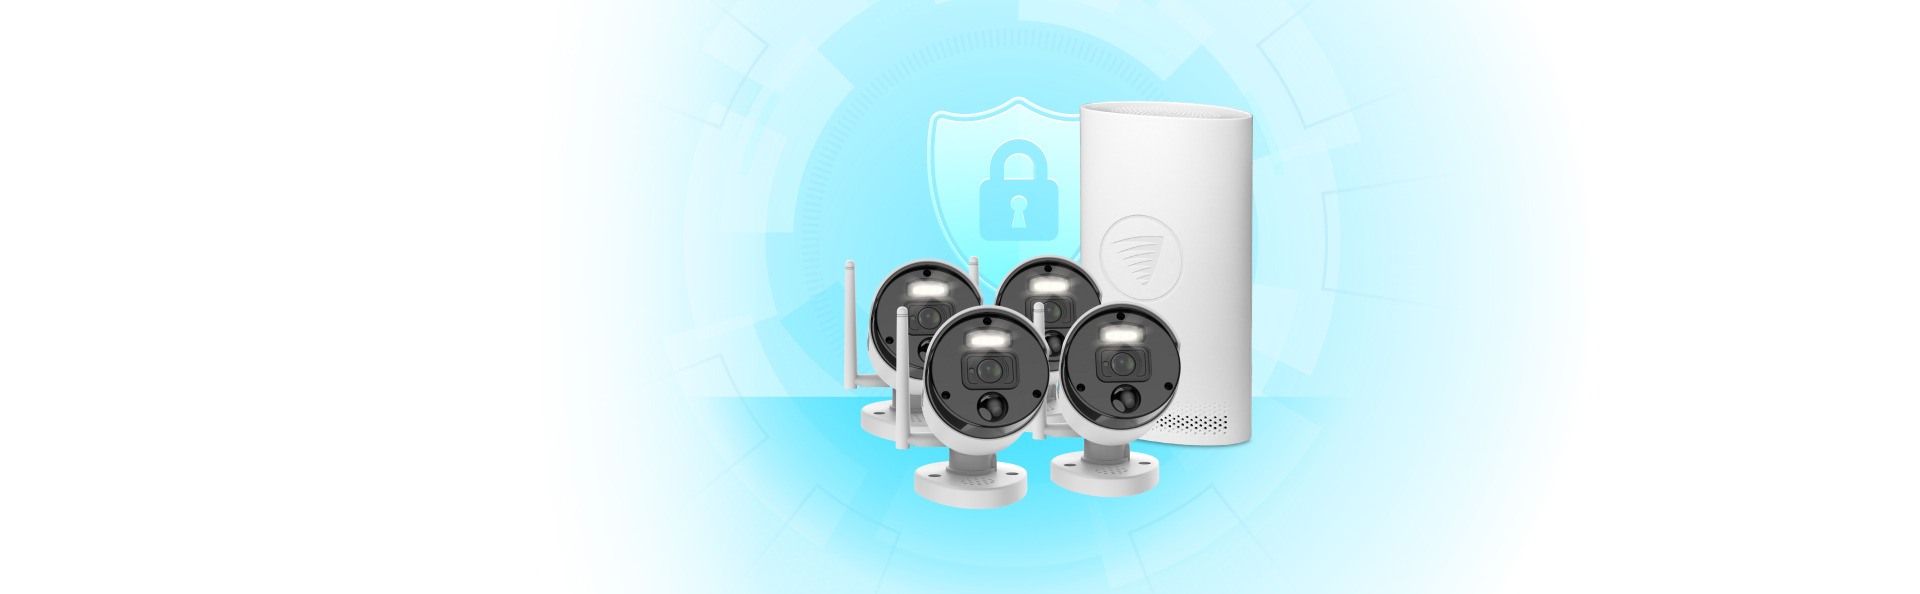 Swann Home Security Camera Systems photo